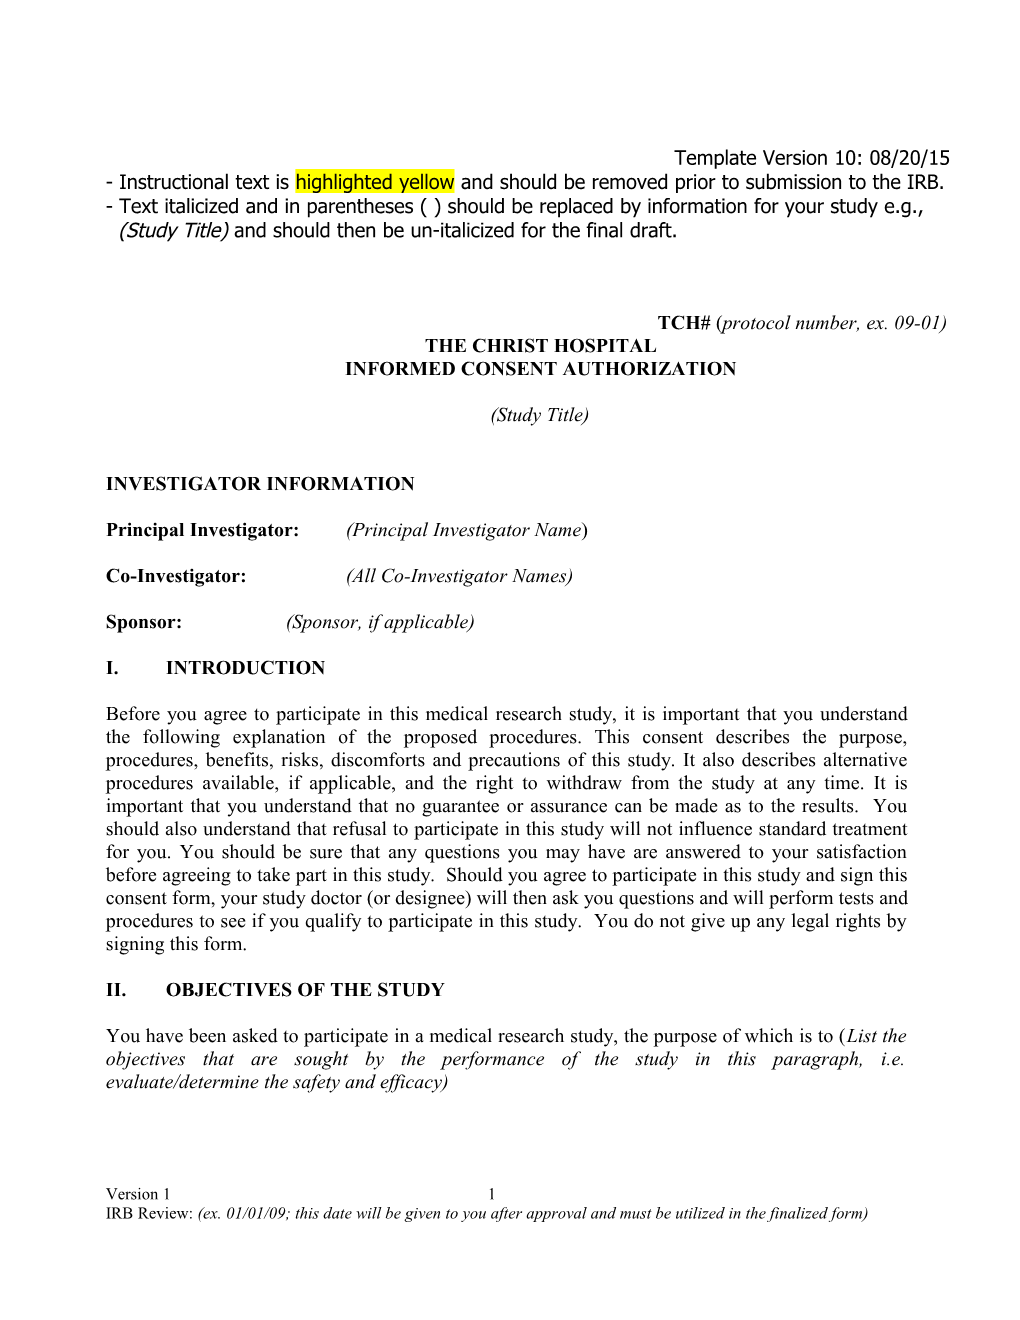 Instructional Text Is Highlighted Yellow and Should Be Removed Prior to Submission to the IRB